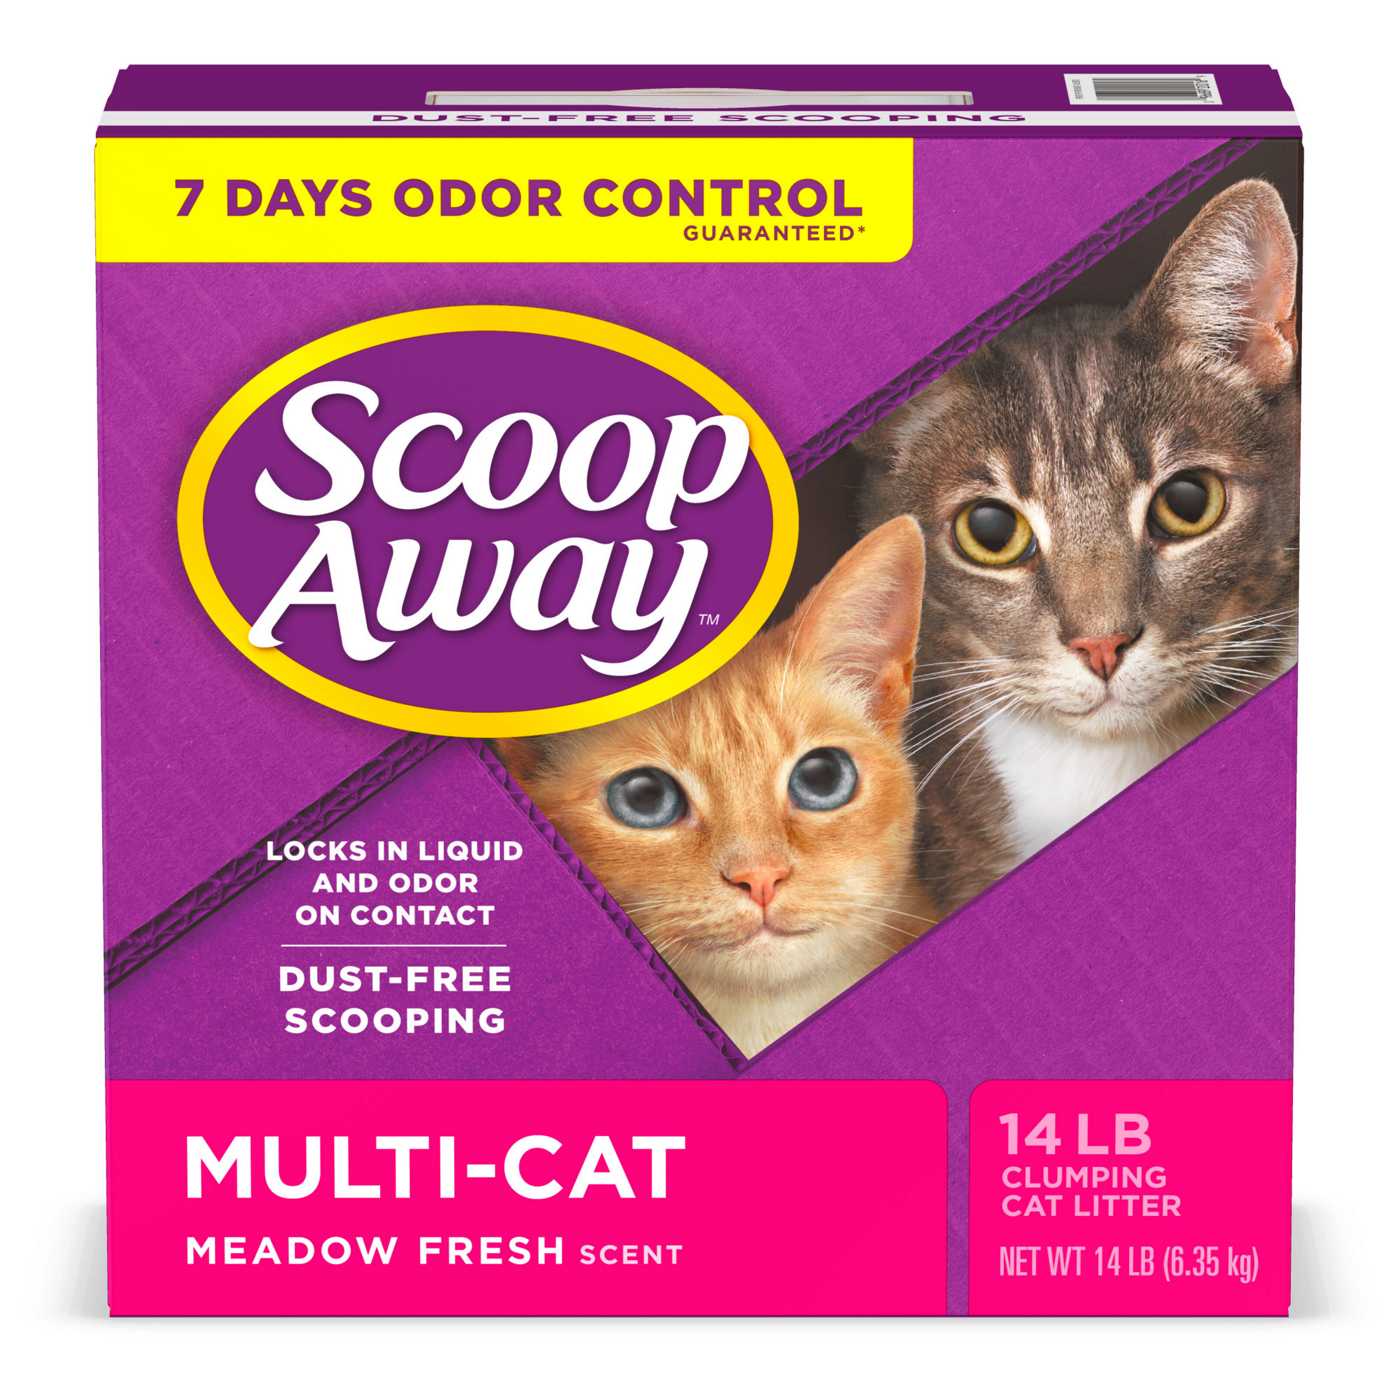 Scoop Away Multi-Cat Clumping Cat Litter, Meadow Fresh Scent; image 2 of 7